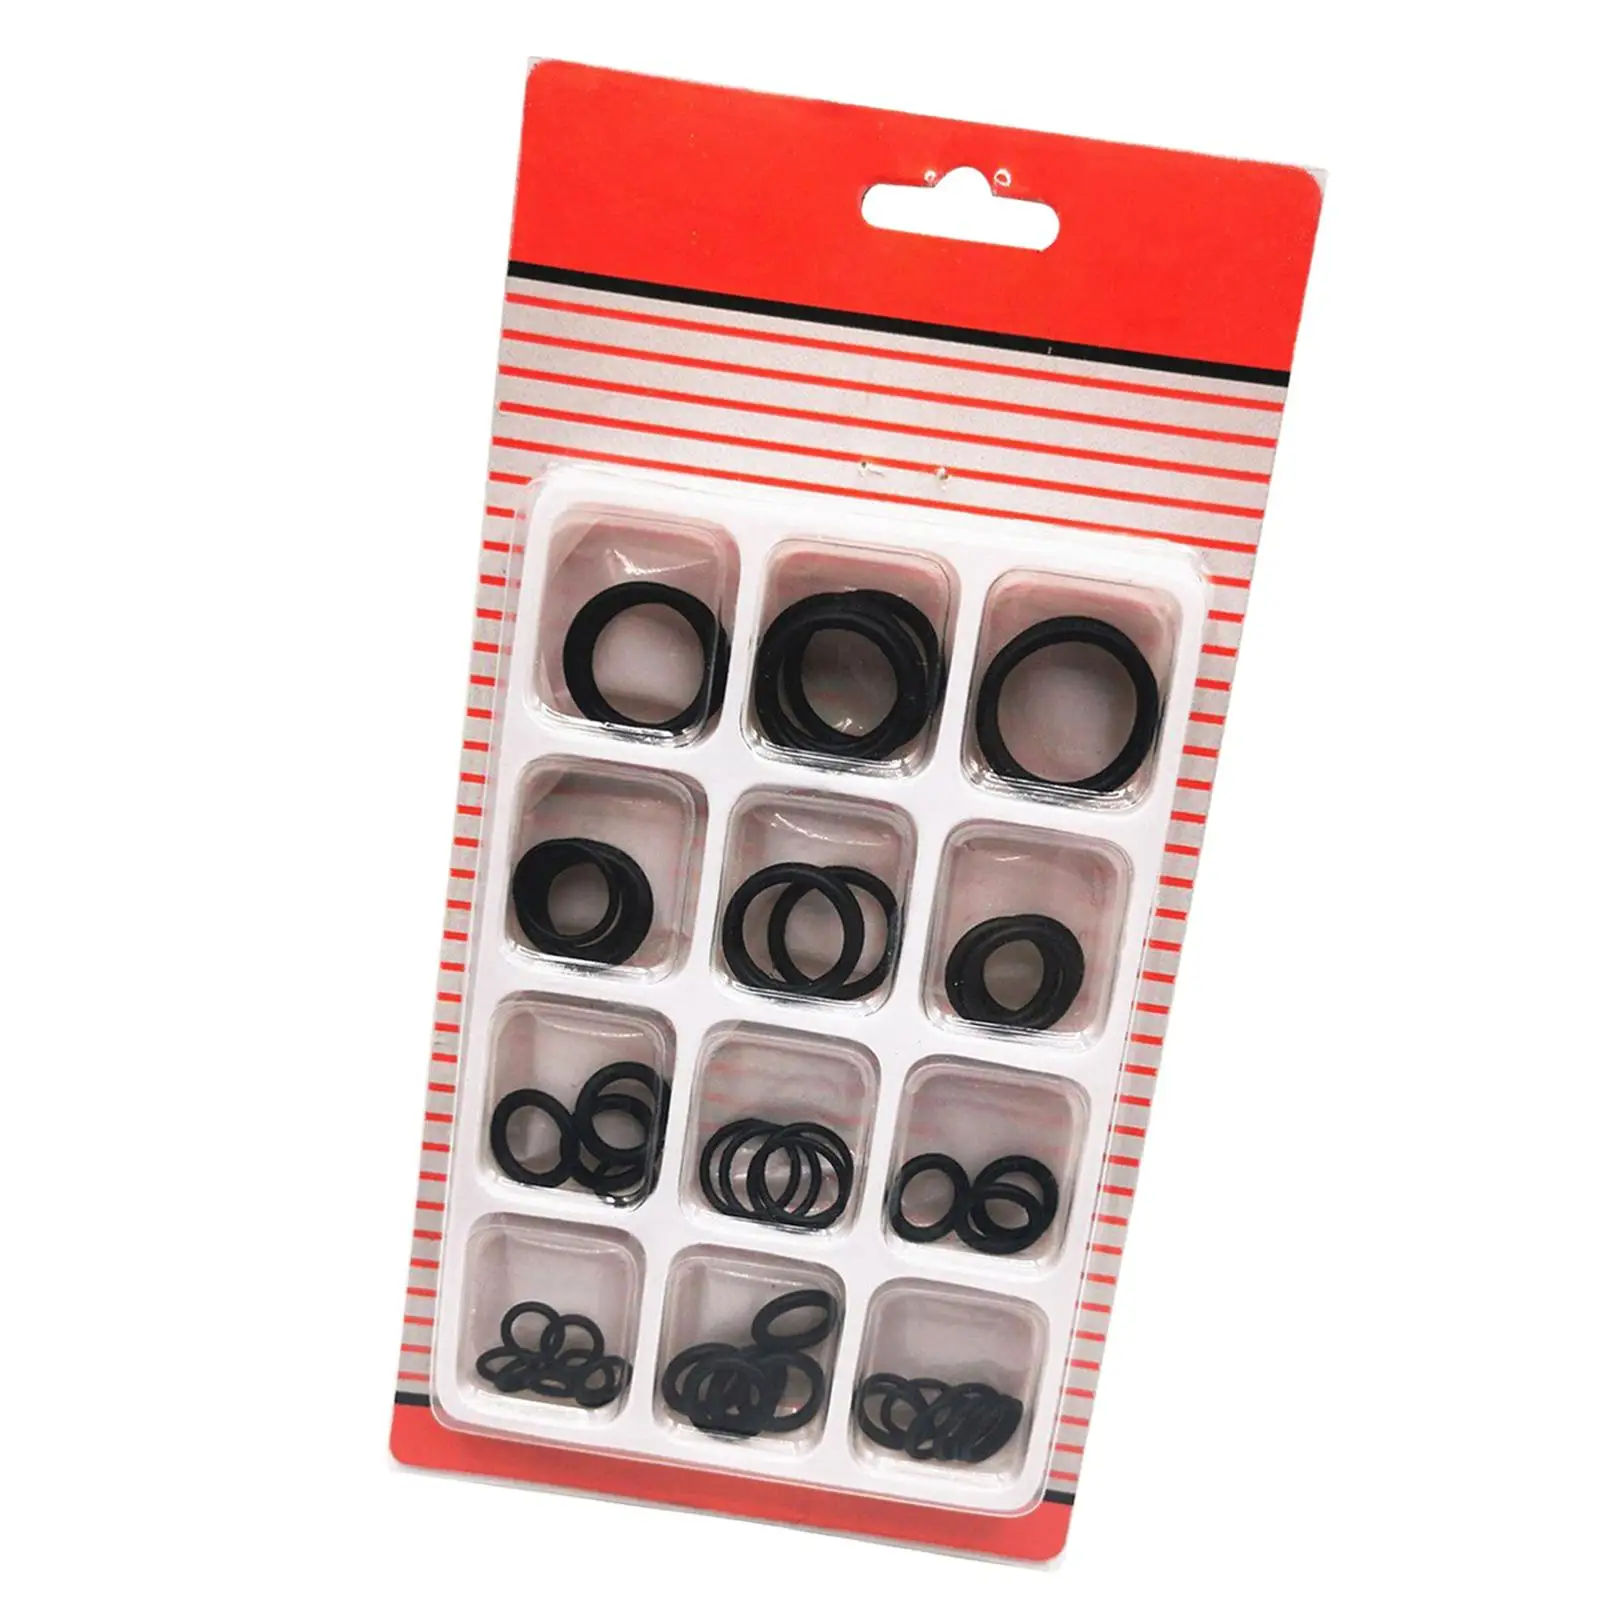 50 Pieces Universal Rubber O Rings Assorted Kit Different Sizes Spacer for Hose